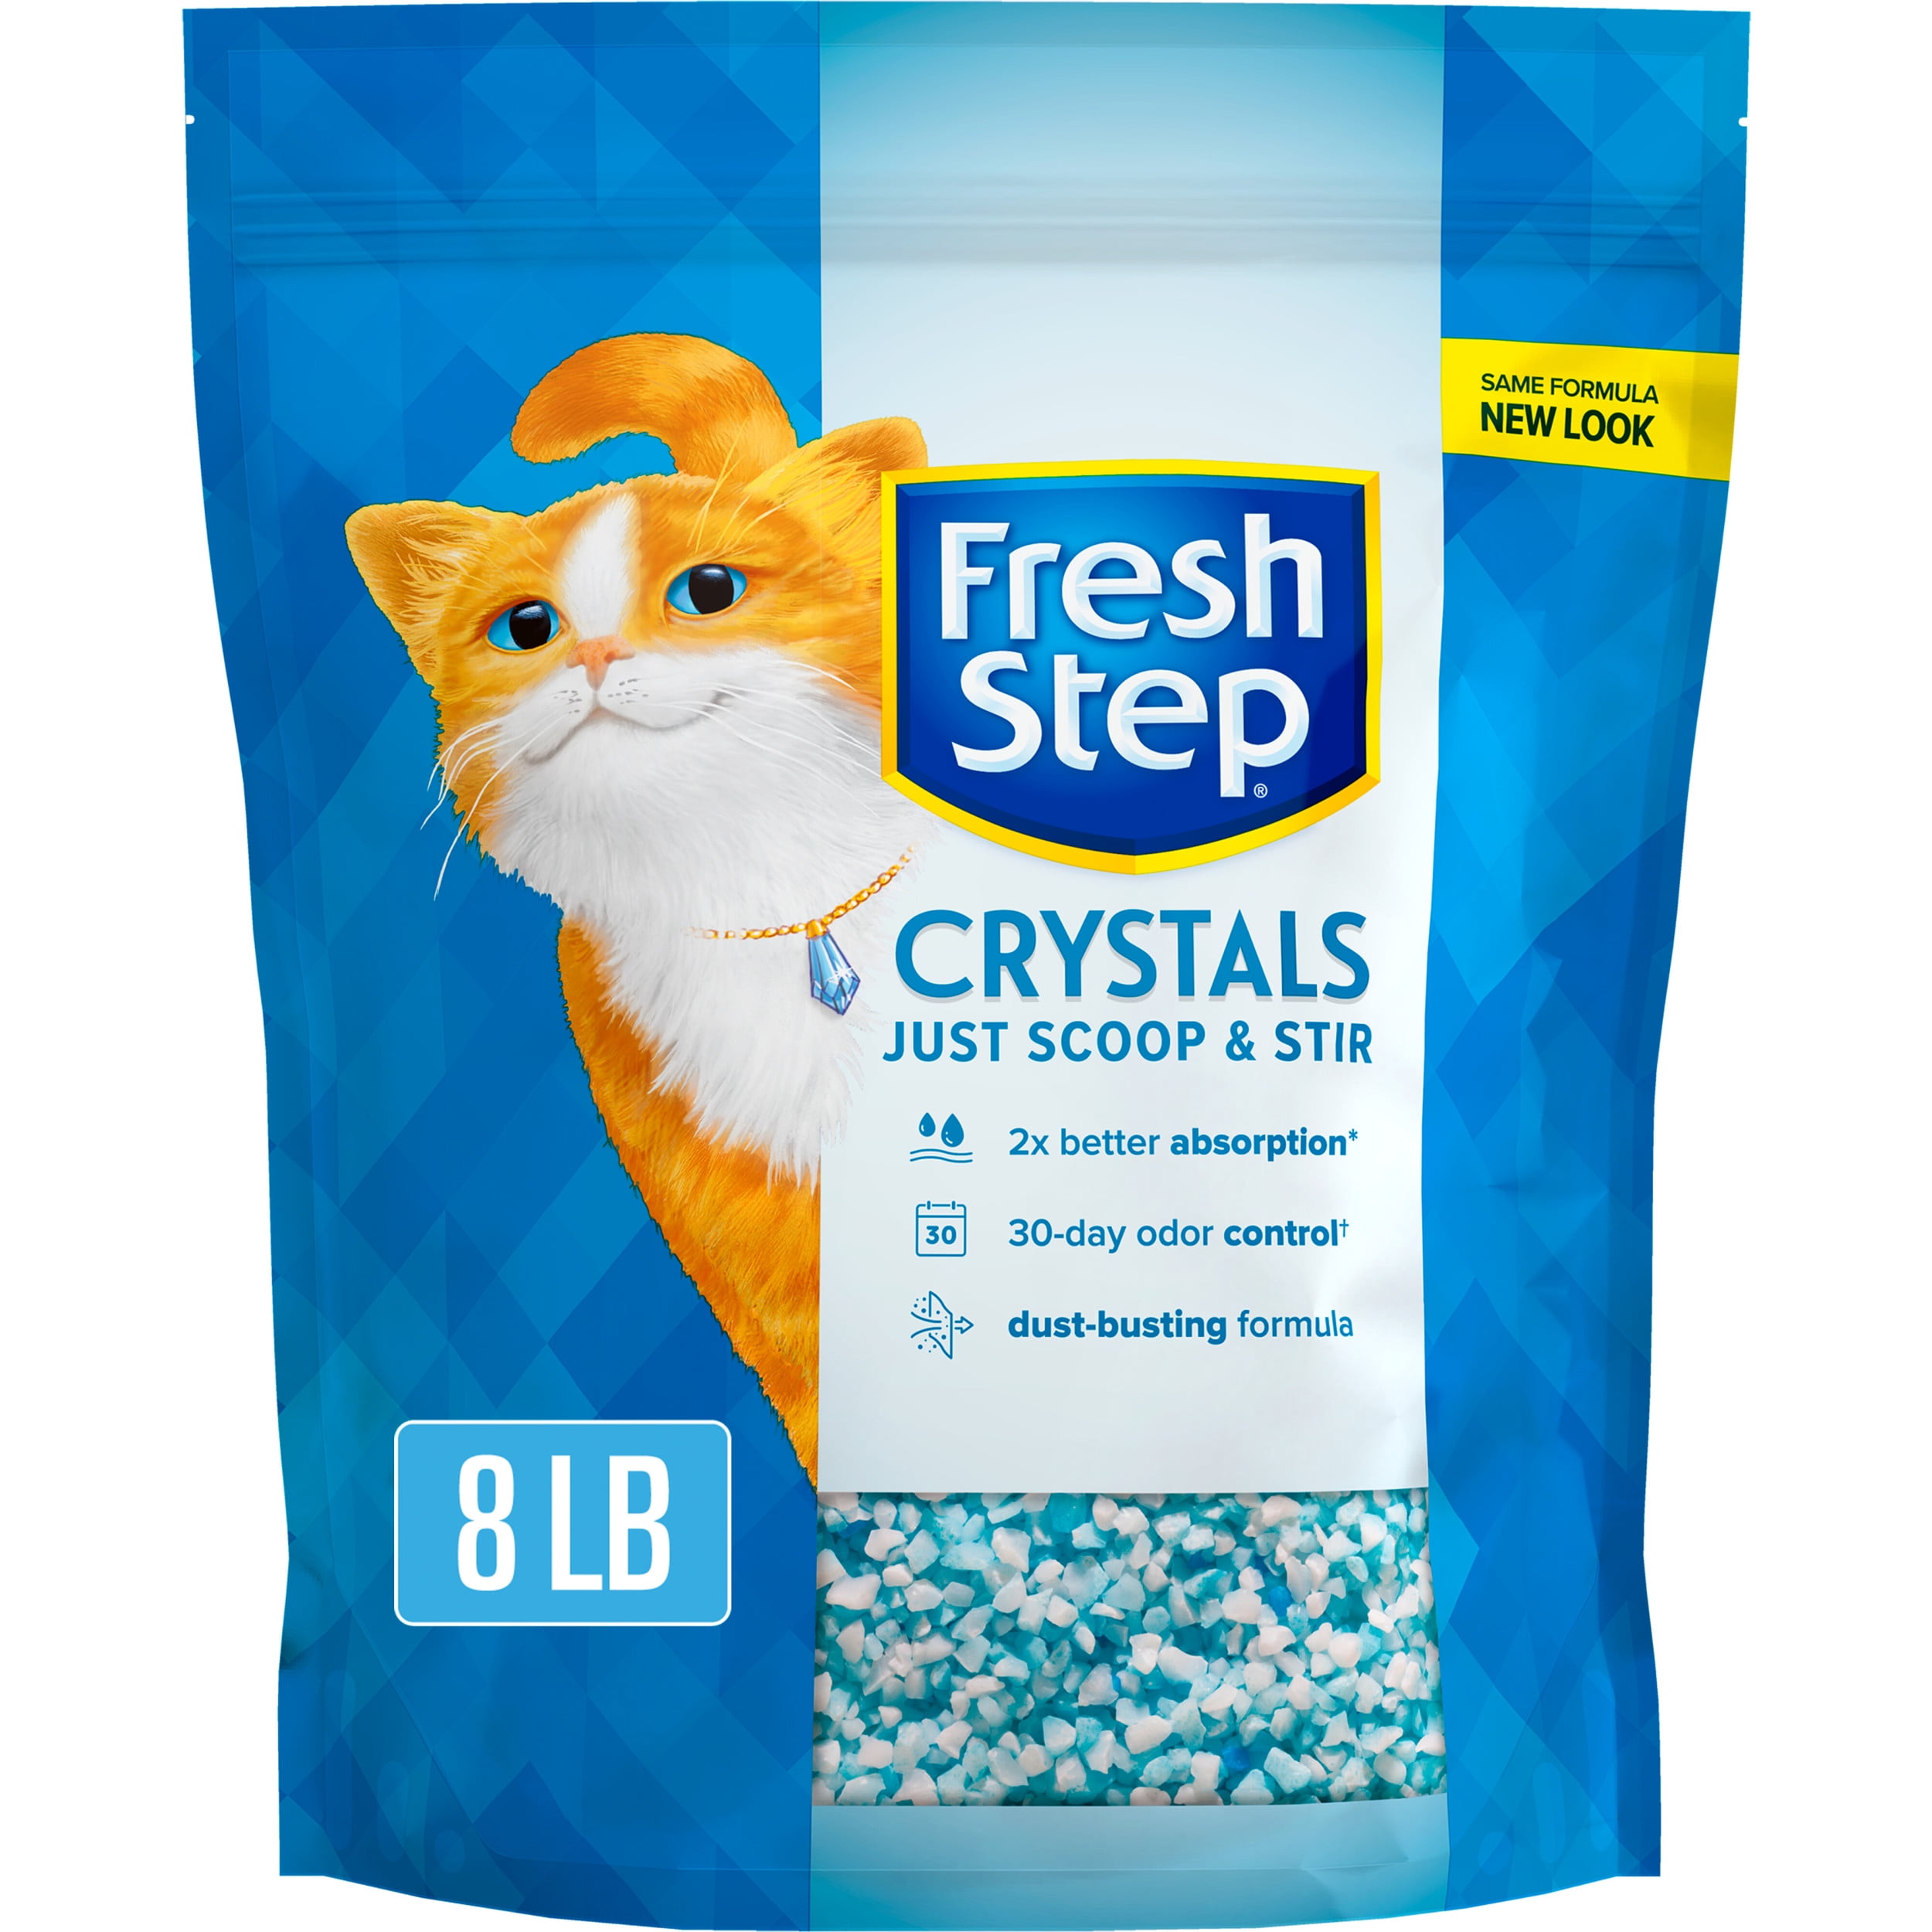 Fresh Step Crystals, Premium Cat Litter, Scented, 8 Pounds